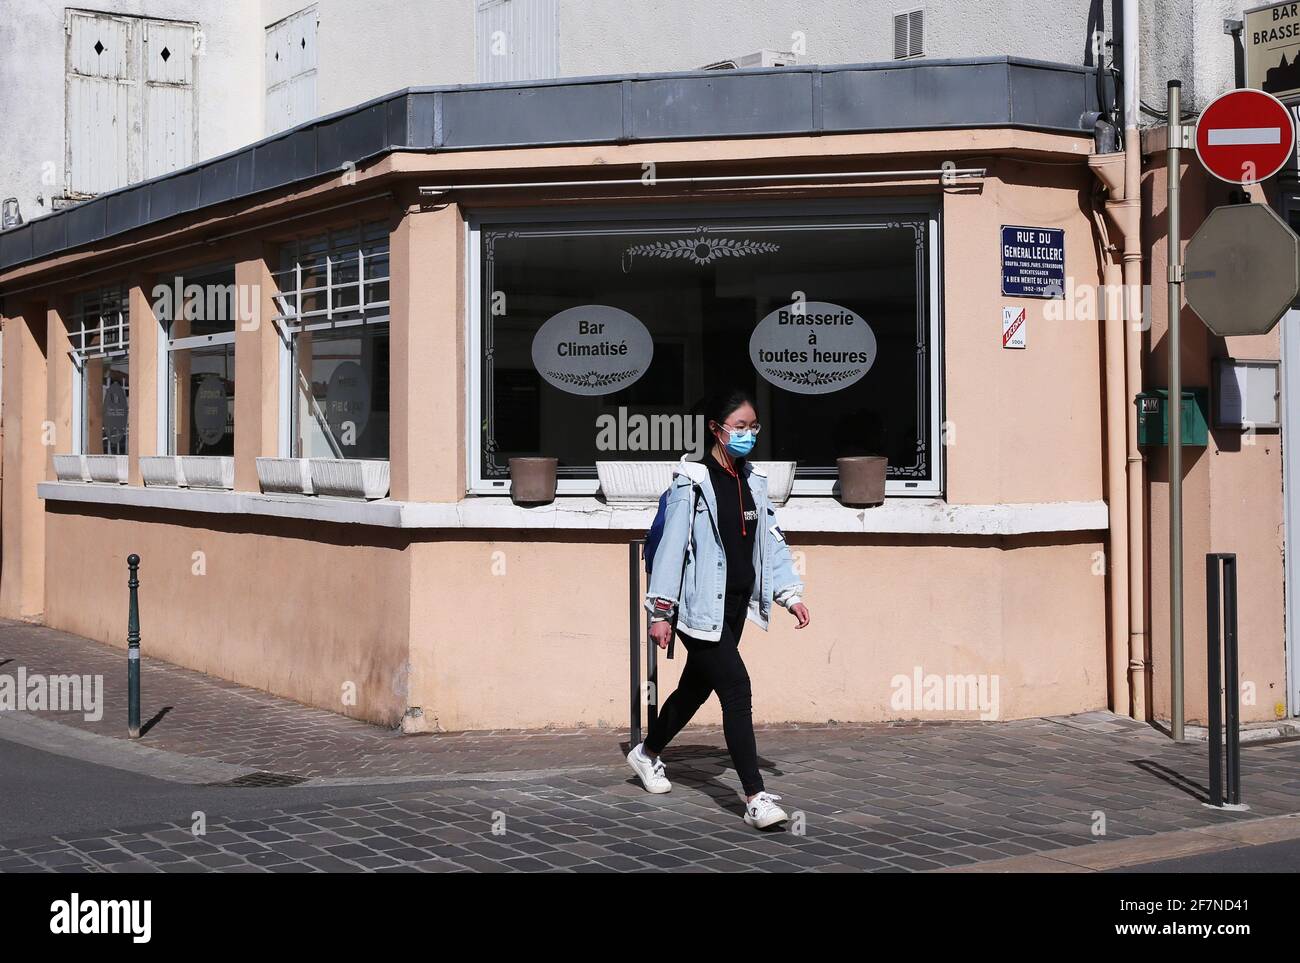 Montargis, France. 8th Apr, 2021. A woman walks past a closed restaurant in Montargis, central France, on April 8, 2021. More than 10 million people have received a first COVID-19 vaccine dose in France, Prime Minister Jean Castex announced on Thursday, pledging to quickly expand the vaccination rollout. Credit: Gao Jing/Xinhua/Alamy Live News Stock Photo